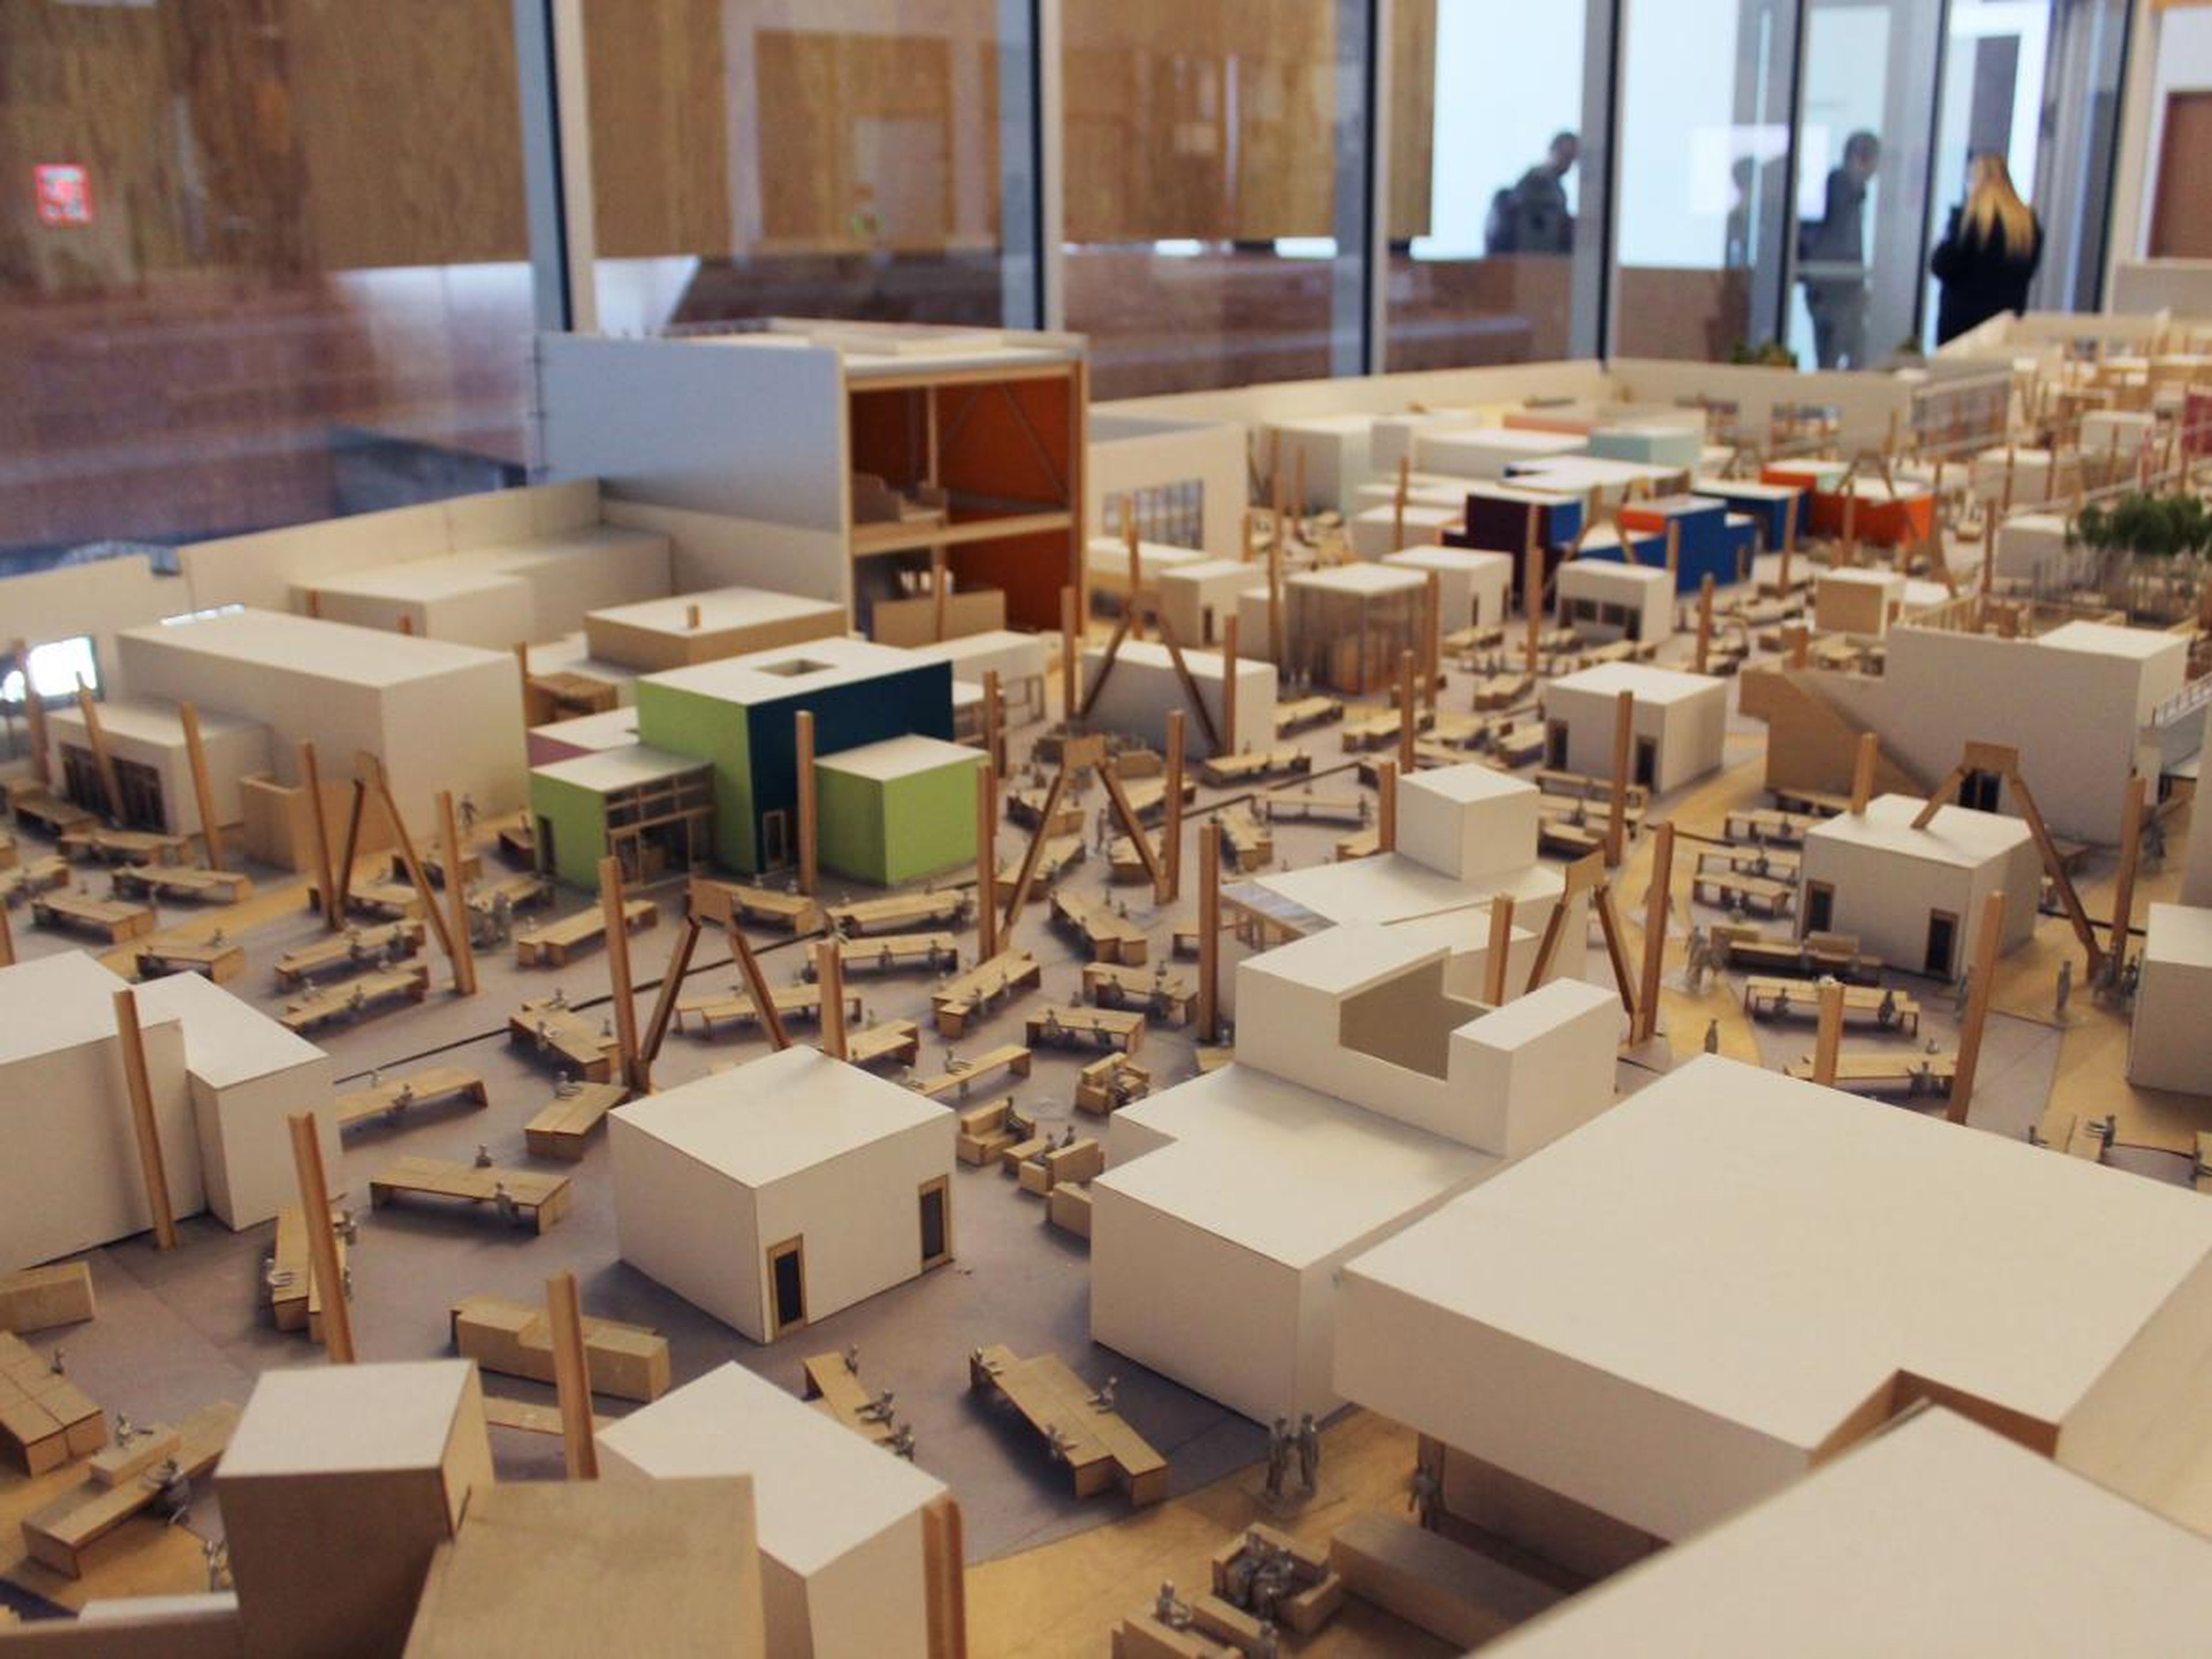 A model of Facebook's new offices displayed in the office.